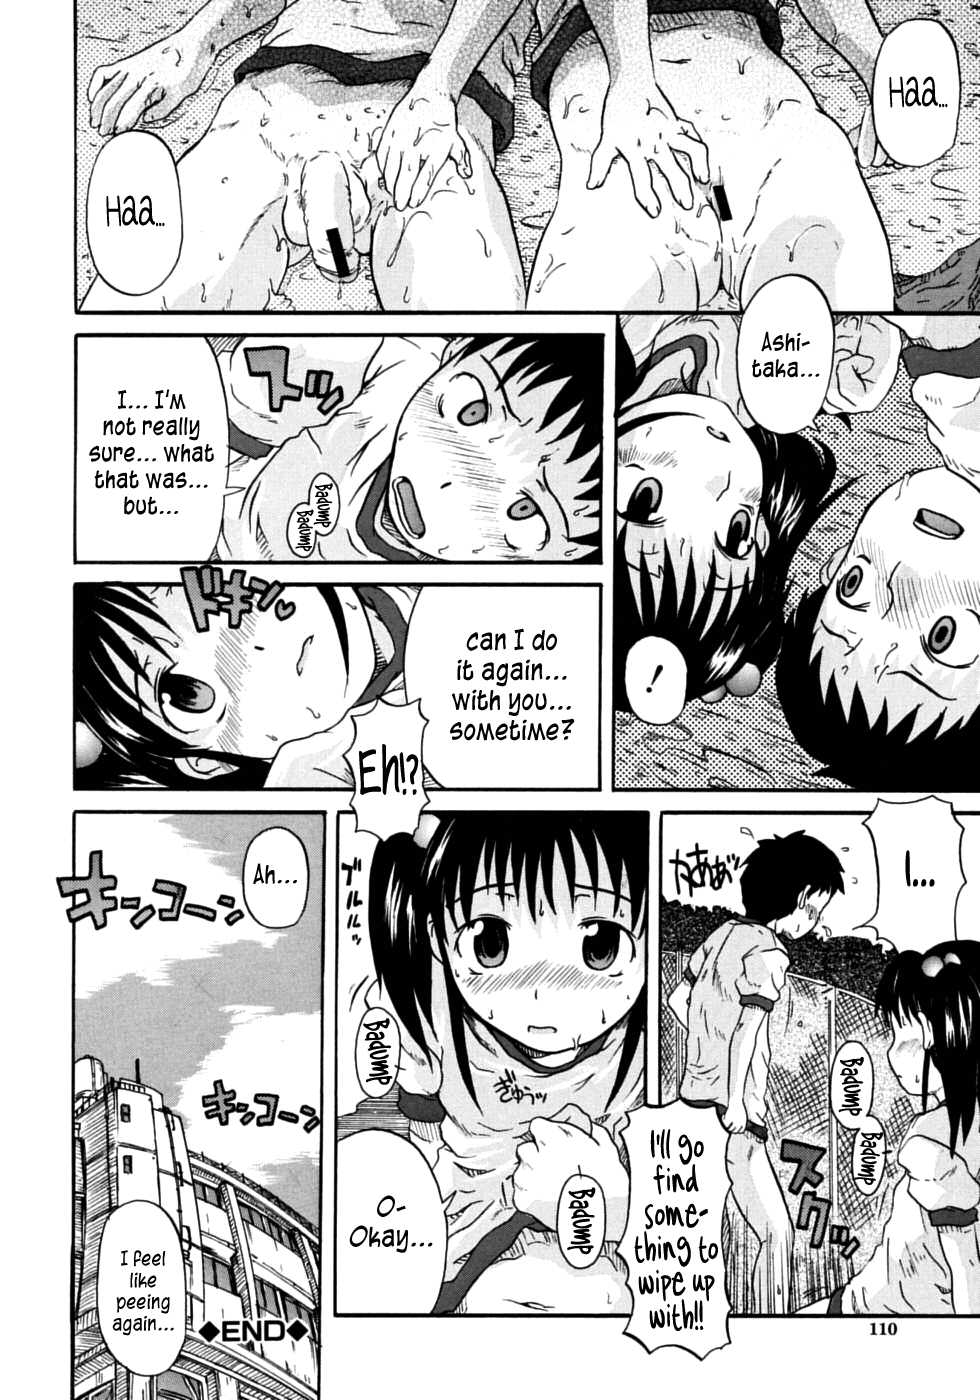 [Shiran Takashi] The Girl With an Increased Frequency of Micturition (Onechu Ch. 4) [English] {Afro} - Page 26